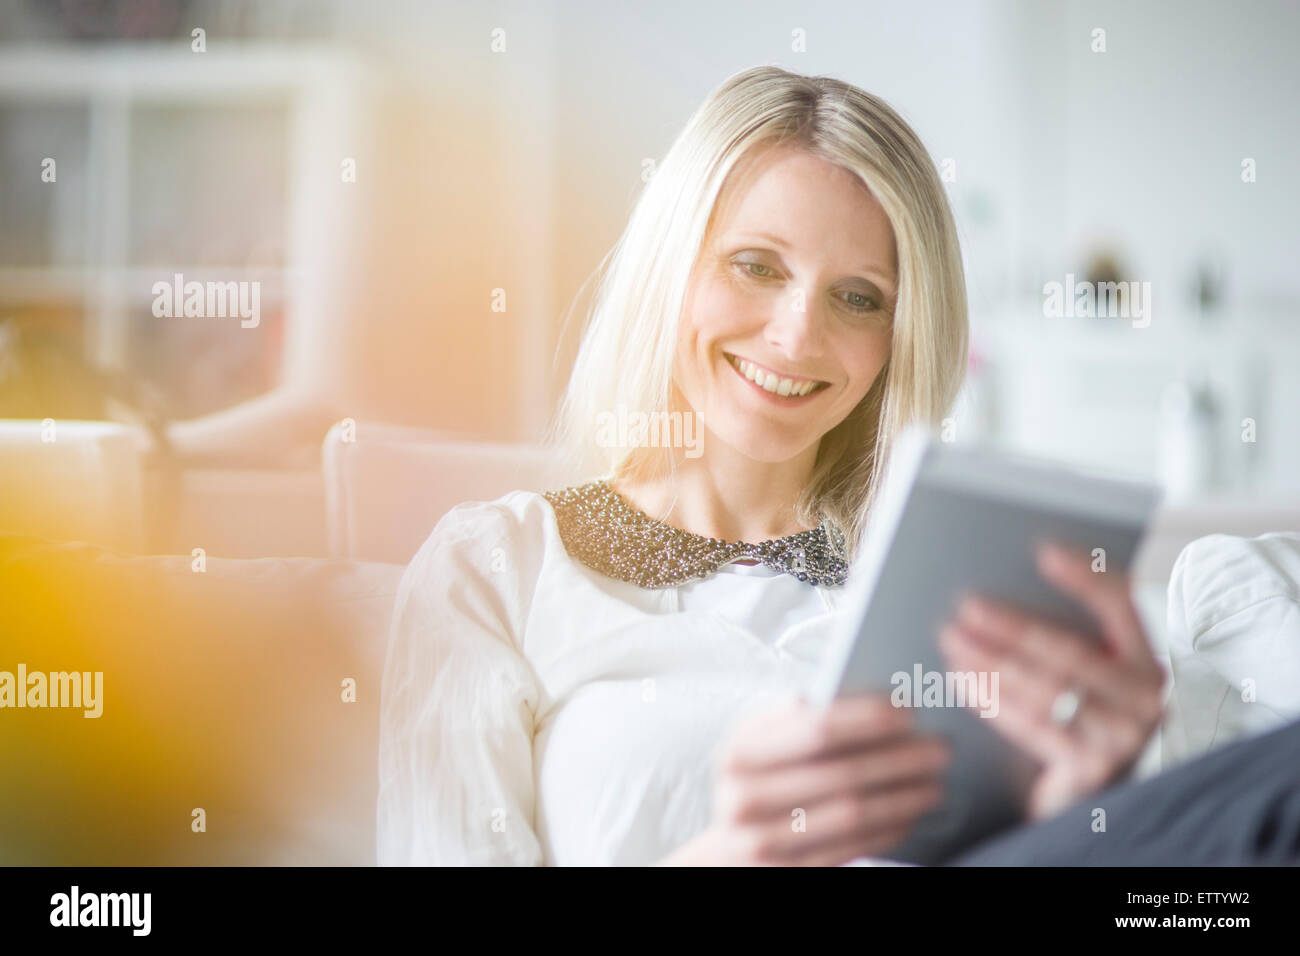 Portrait of smiling blond woman using mini tablet at home Stock Photo